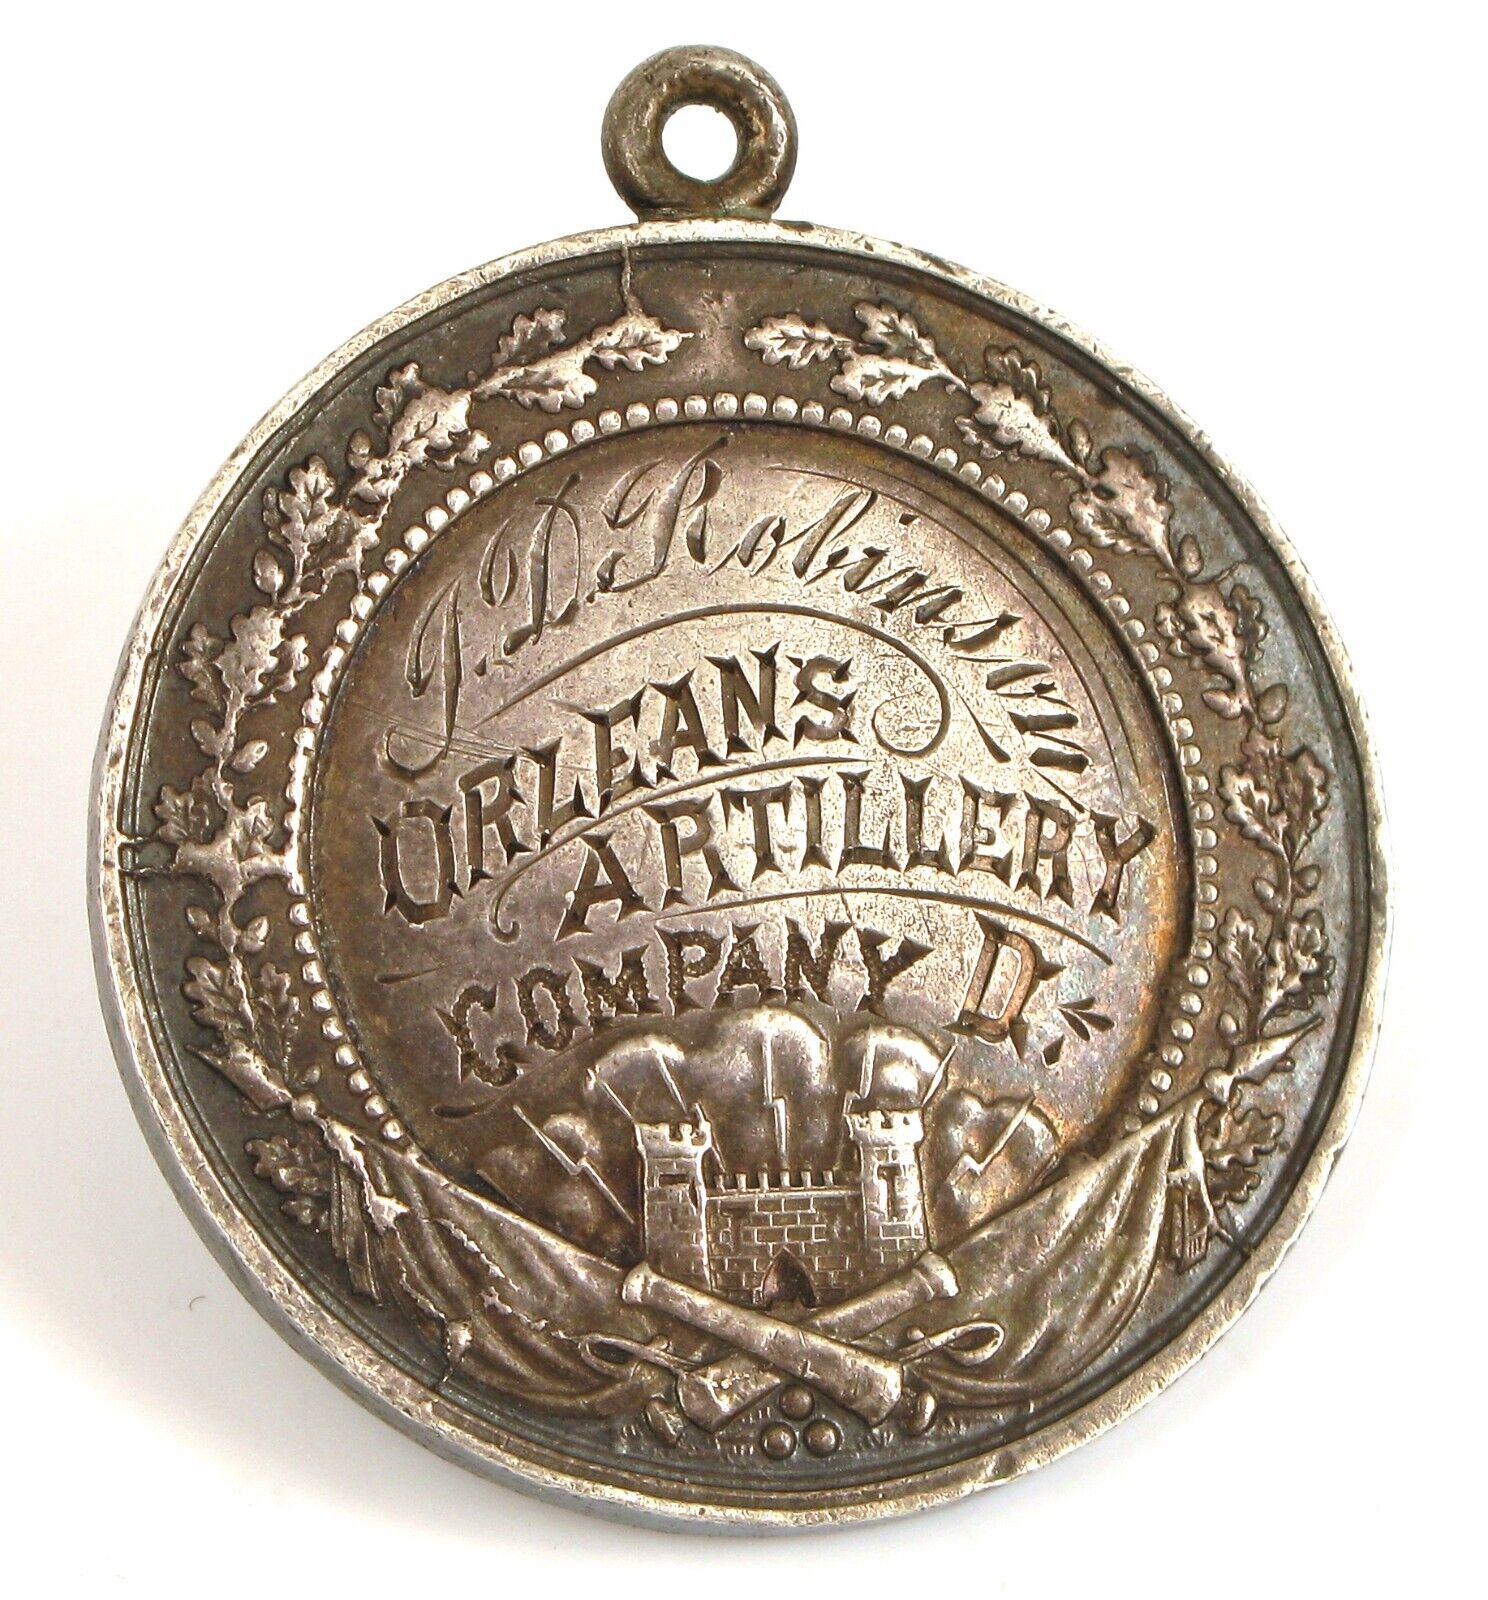 ARMY OF TENNESSEE LOUISIANA DIVISION ORLEANS ARTILLERY NAMED CIVIL WAR MEDAL 